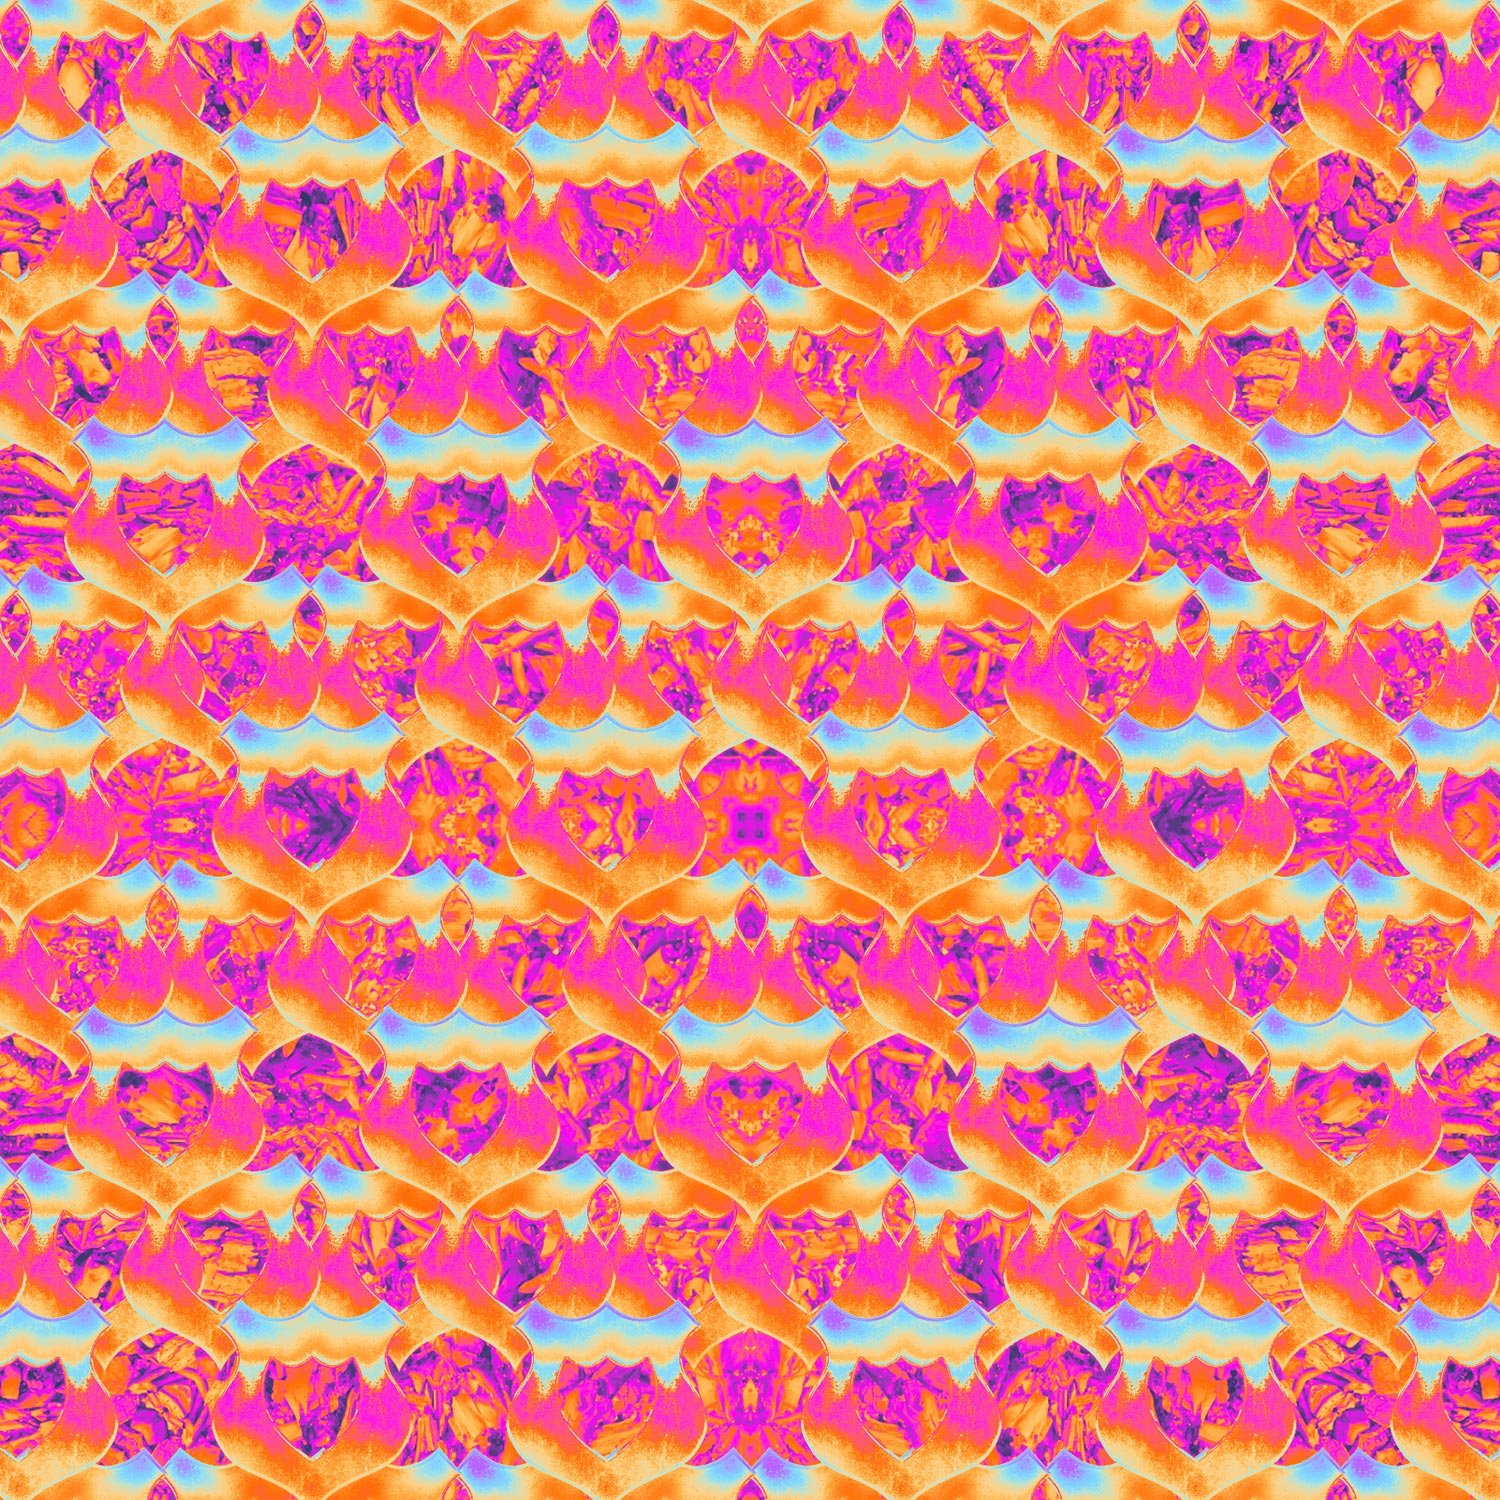 Abstract_Pattern4xx22_LoRes.jpg